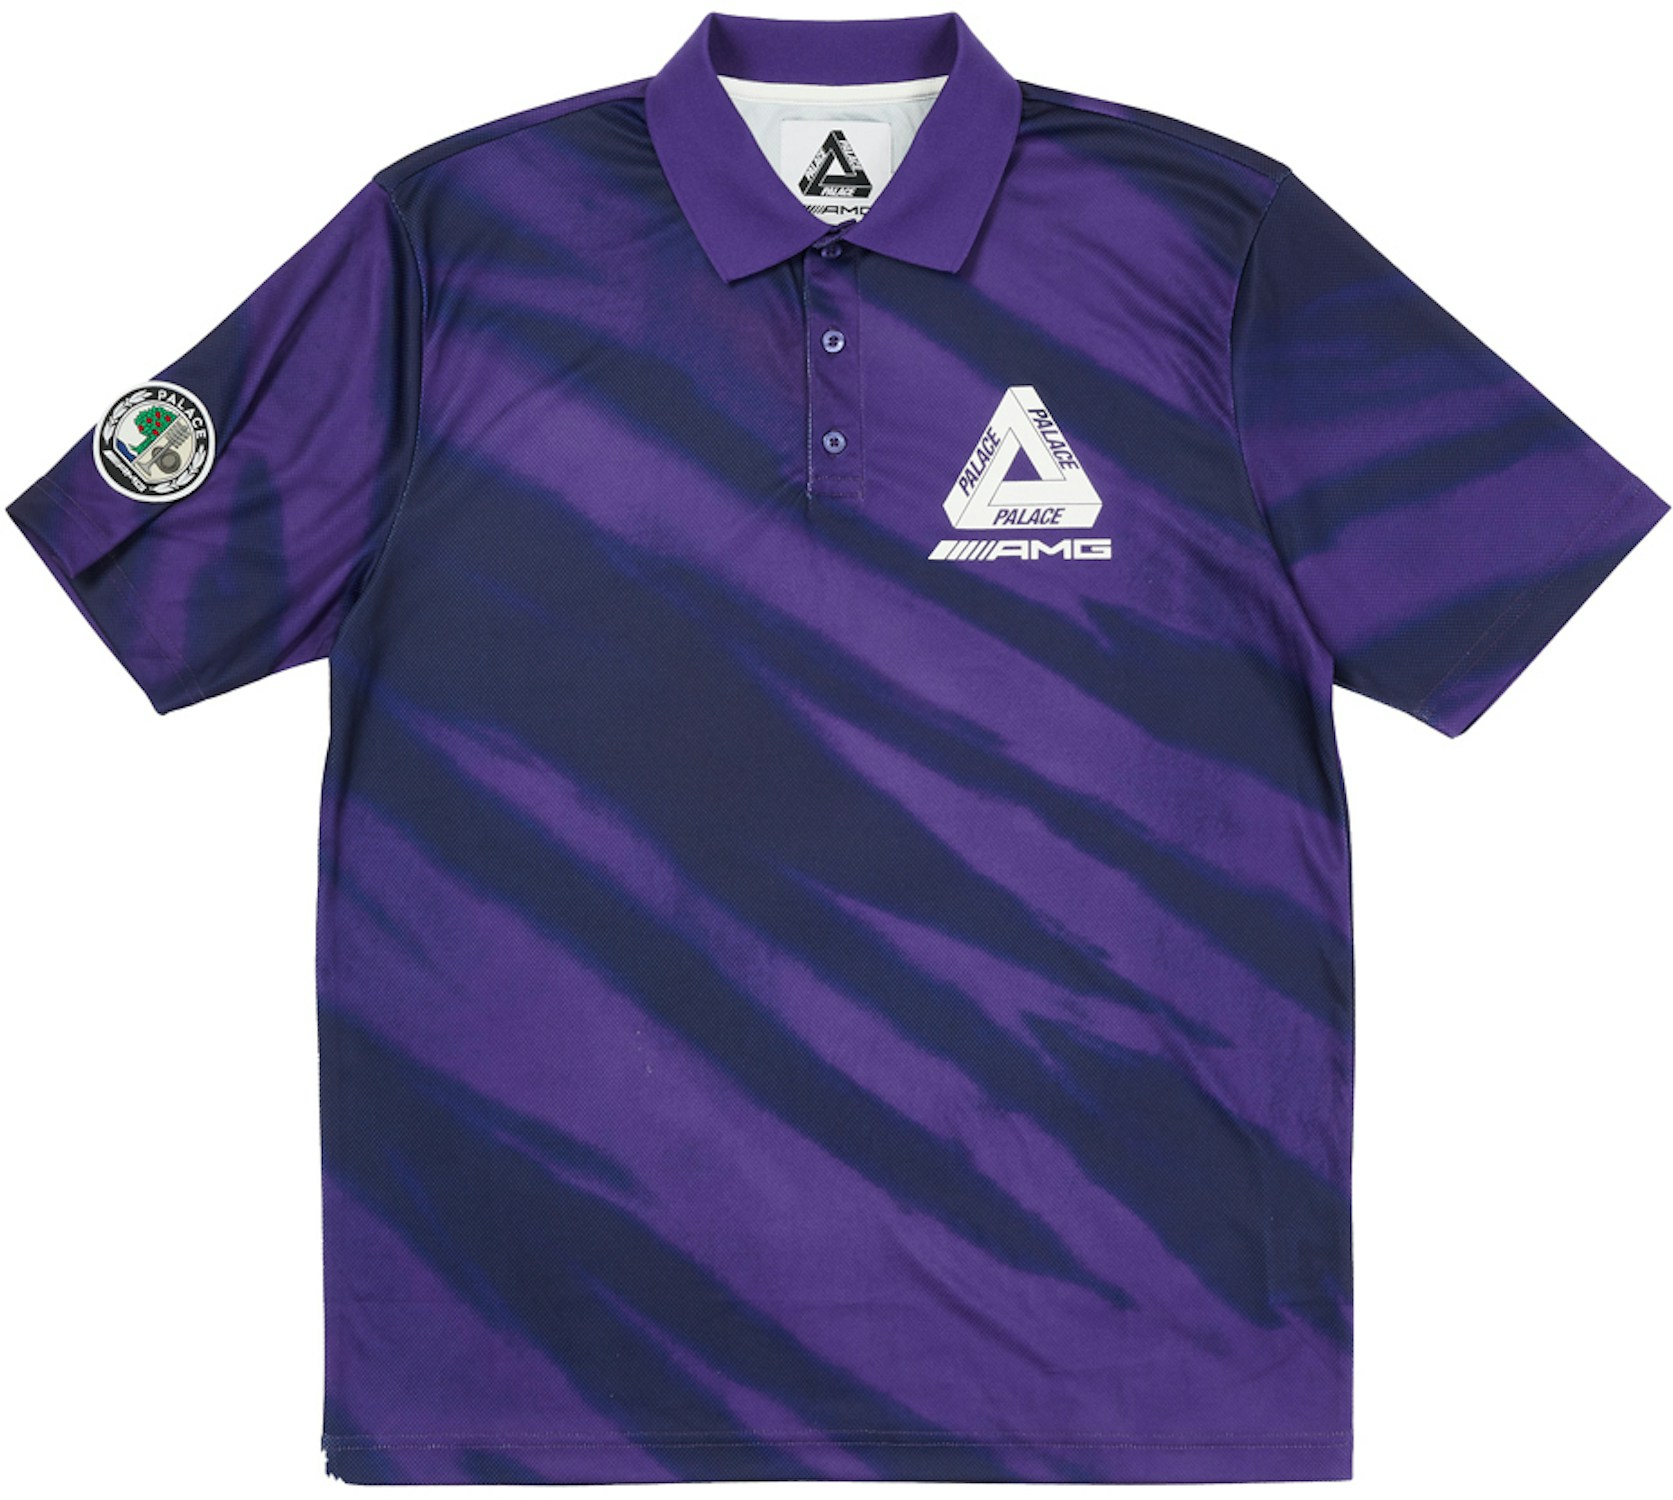 Palace x Polo Ralph Lauren: Where You Can Buy Today